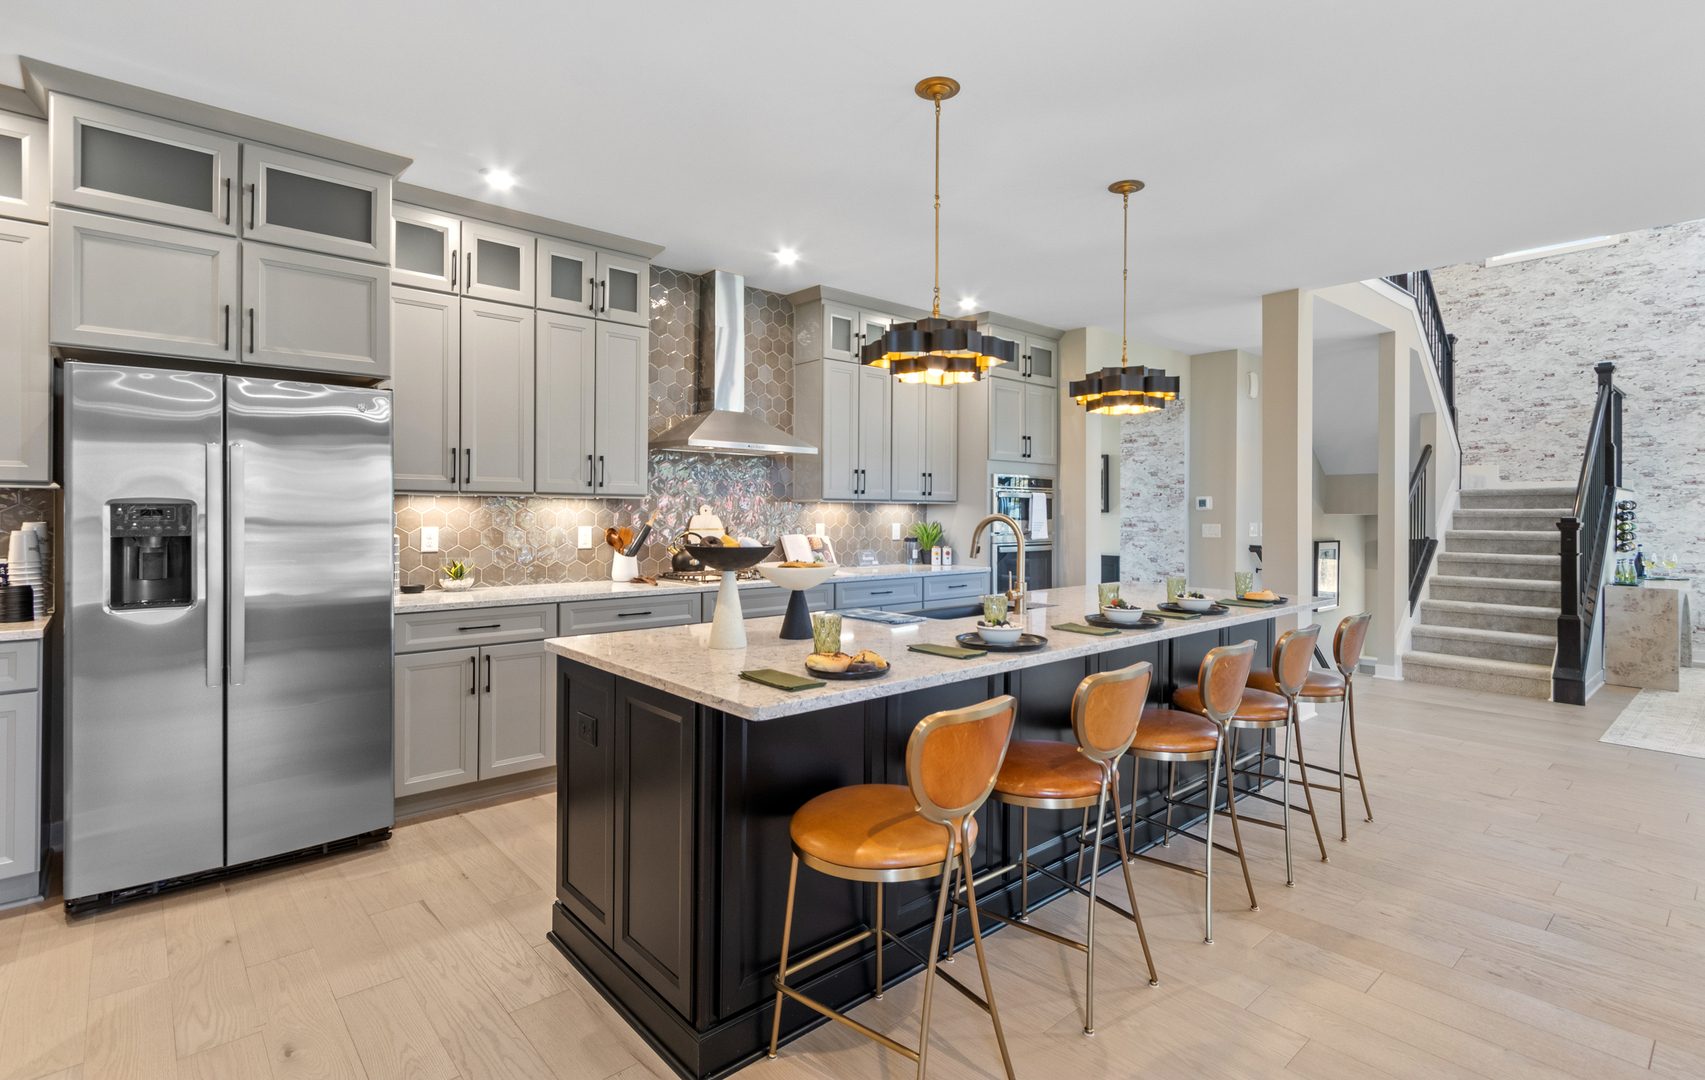 Taste of Fishers by Fischer Homes, Fortville, Indiana, United States